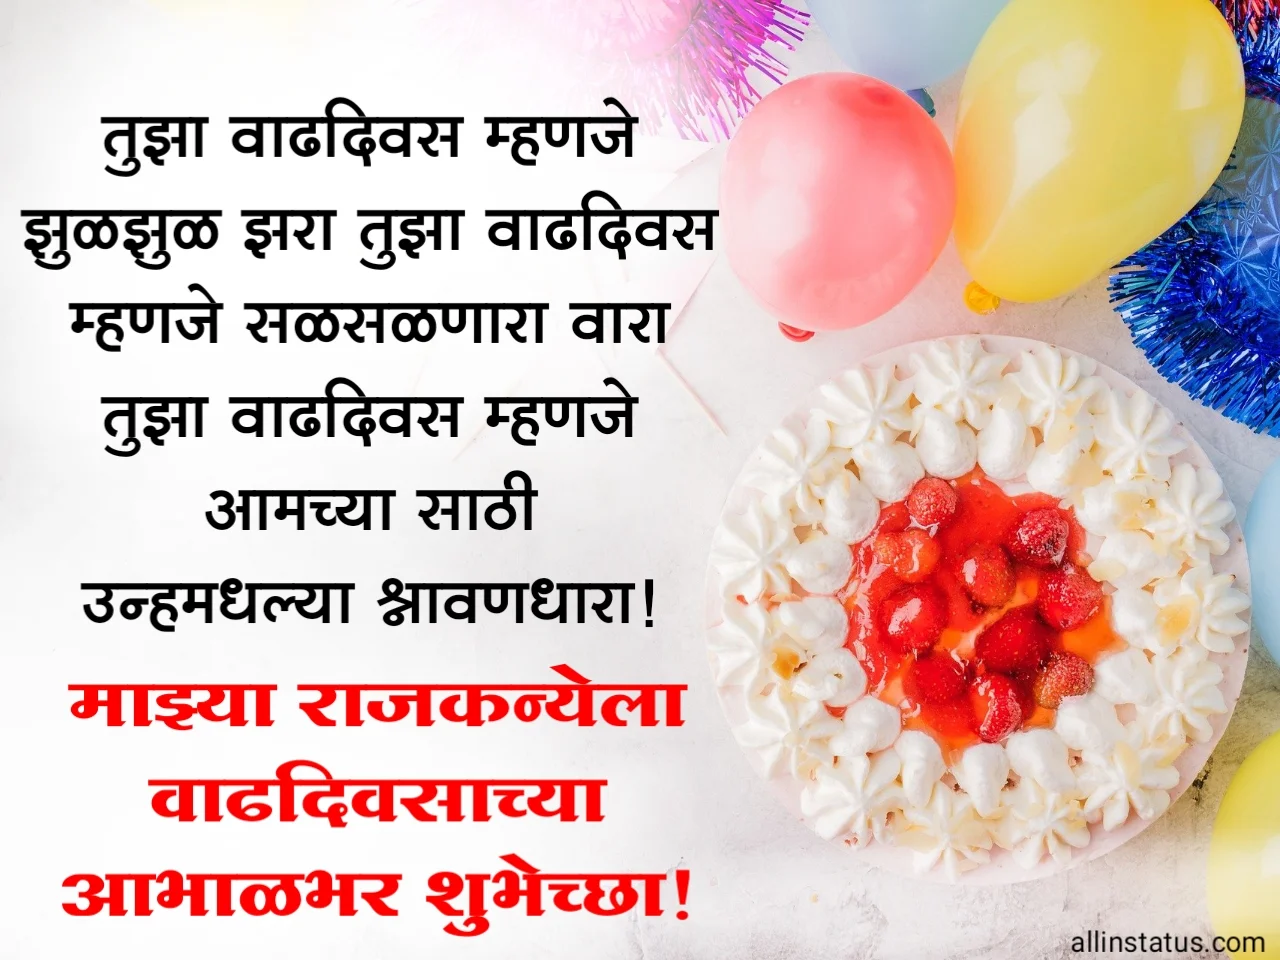 Happy Birthday images for daughter in Marathi